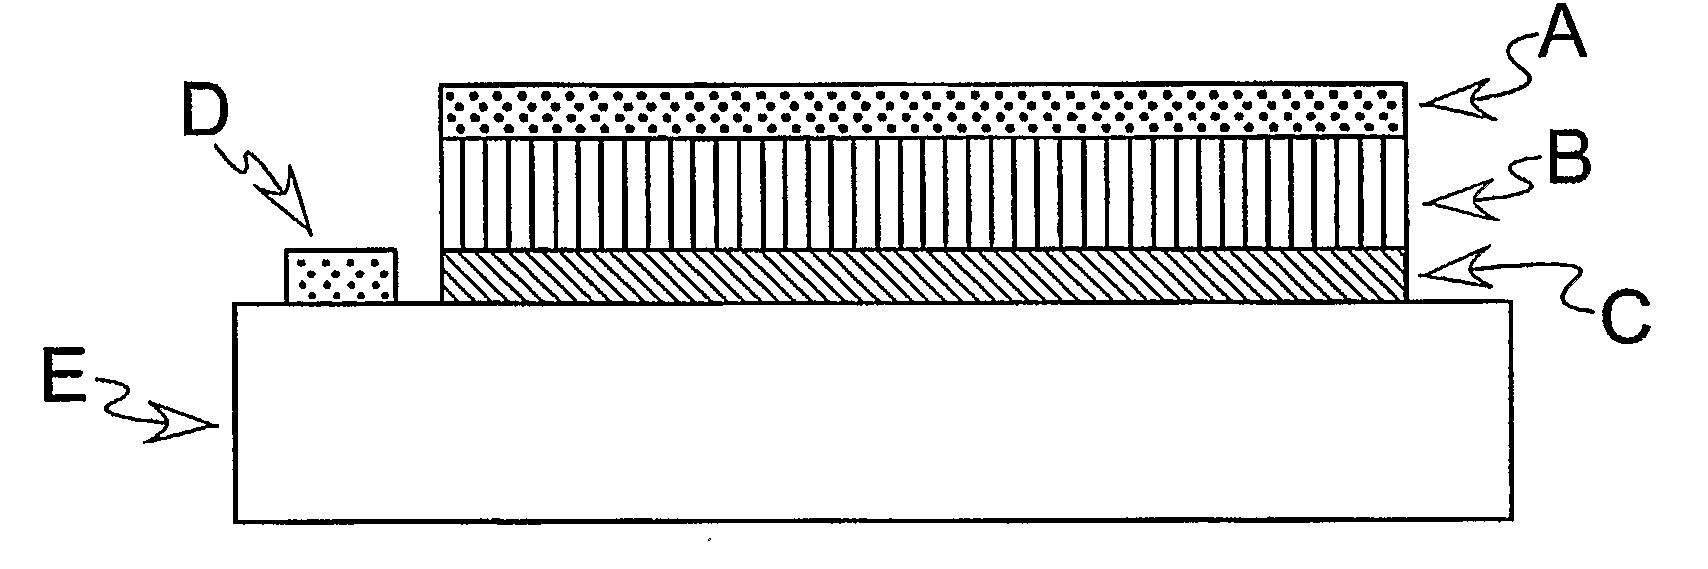 Sulphur-Tolerant Anode For Solid Oxide Fuel Cell